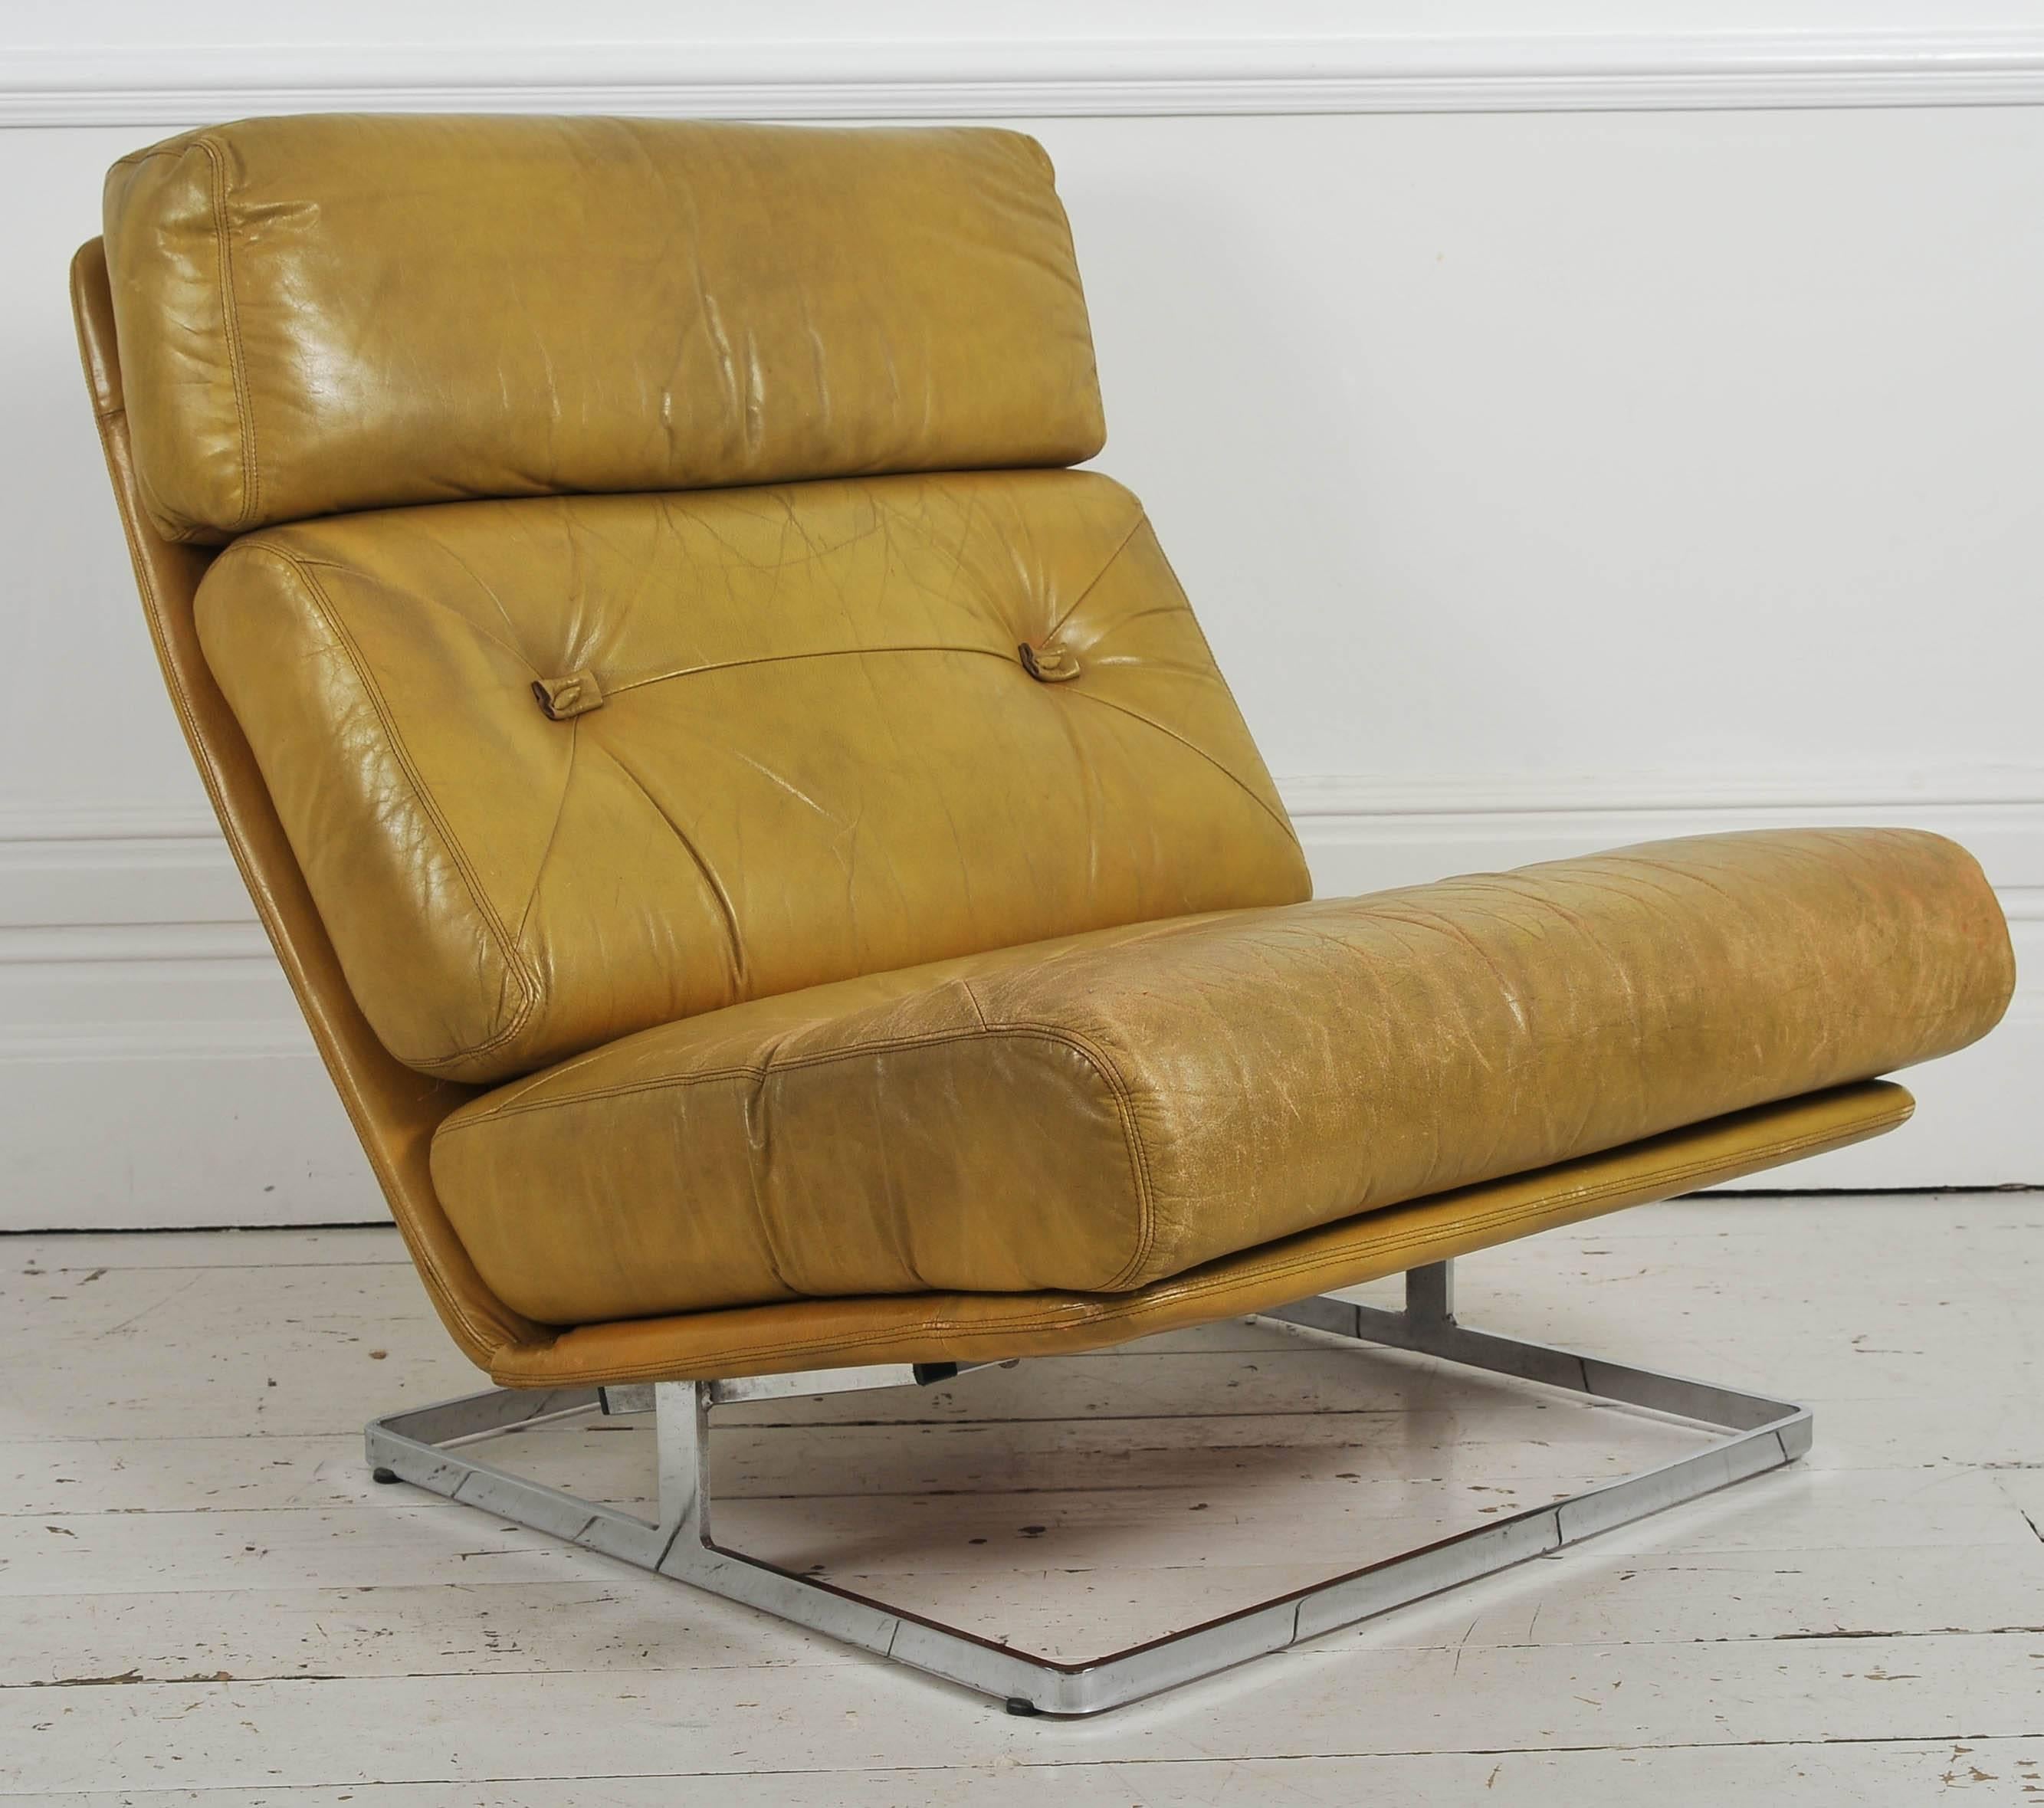 British Pair of Nucleus 1970s Leather and Chrome Low Chairs